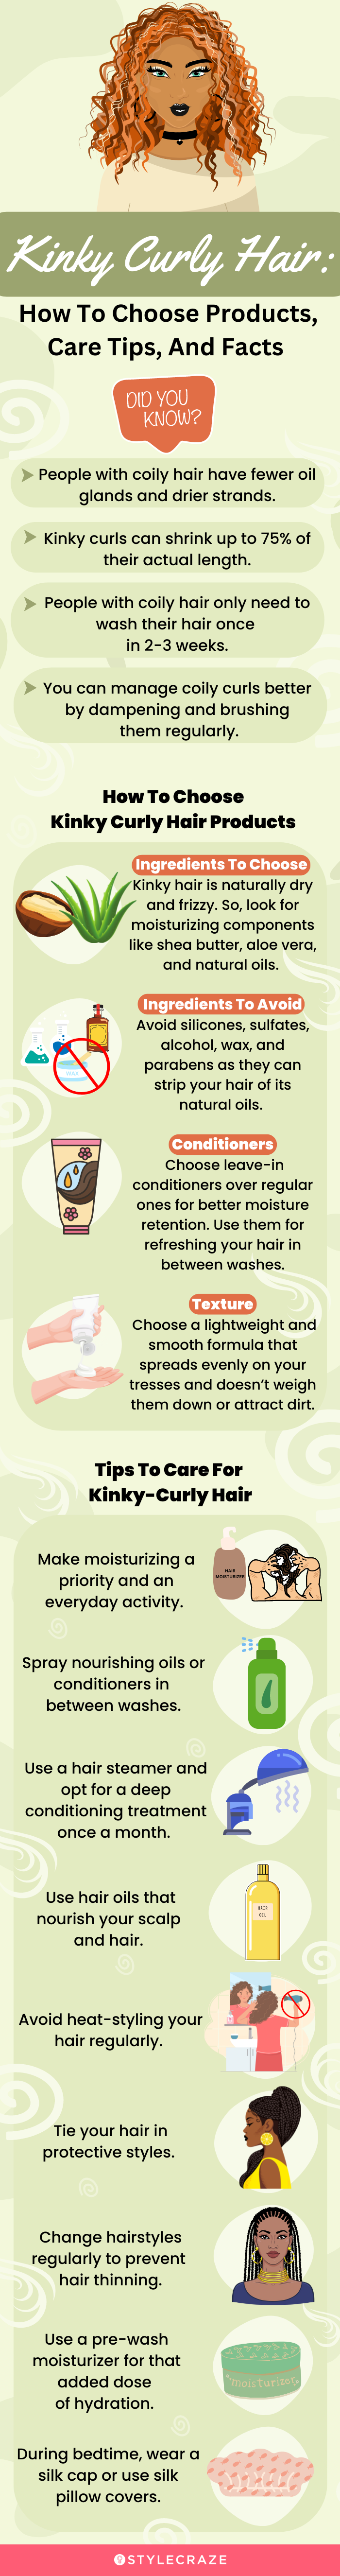 Kinky Curly Hair: How To Choose Products, Care Tips, And Facts [infographic]